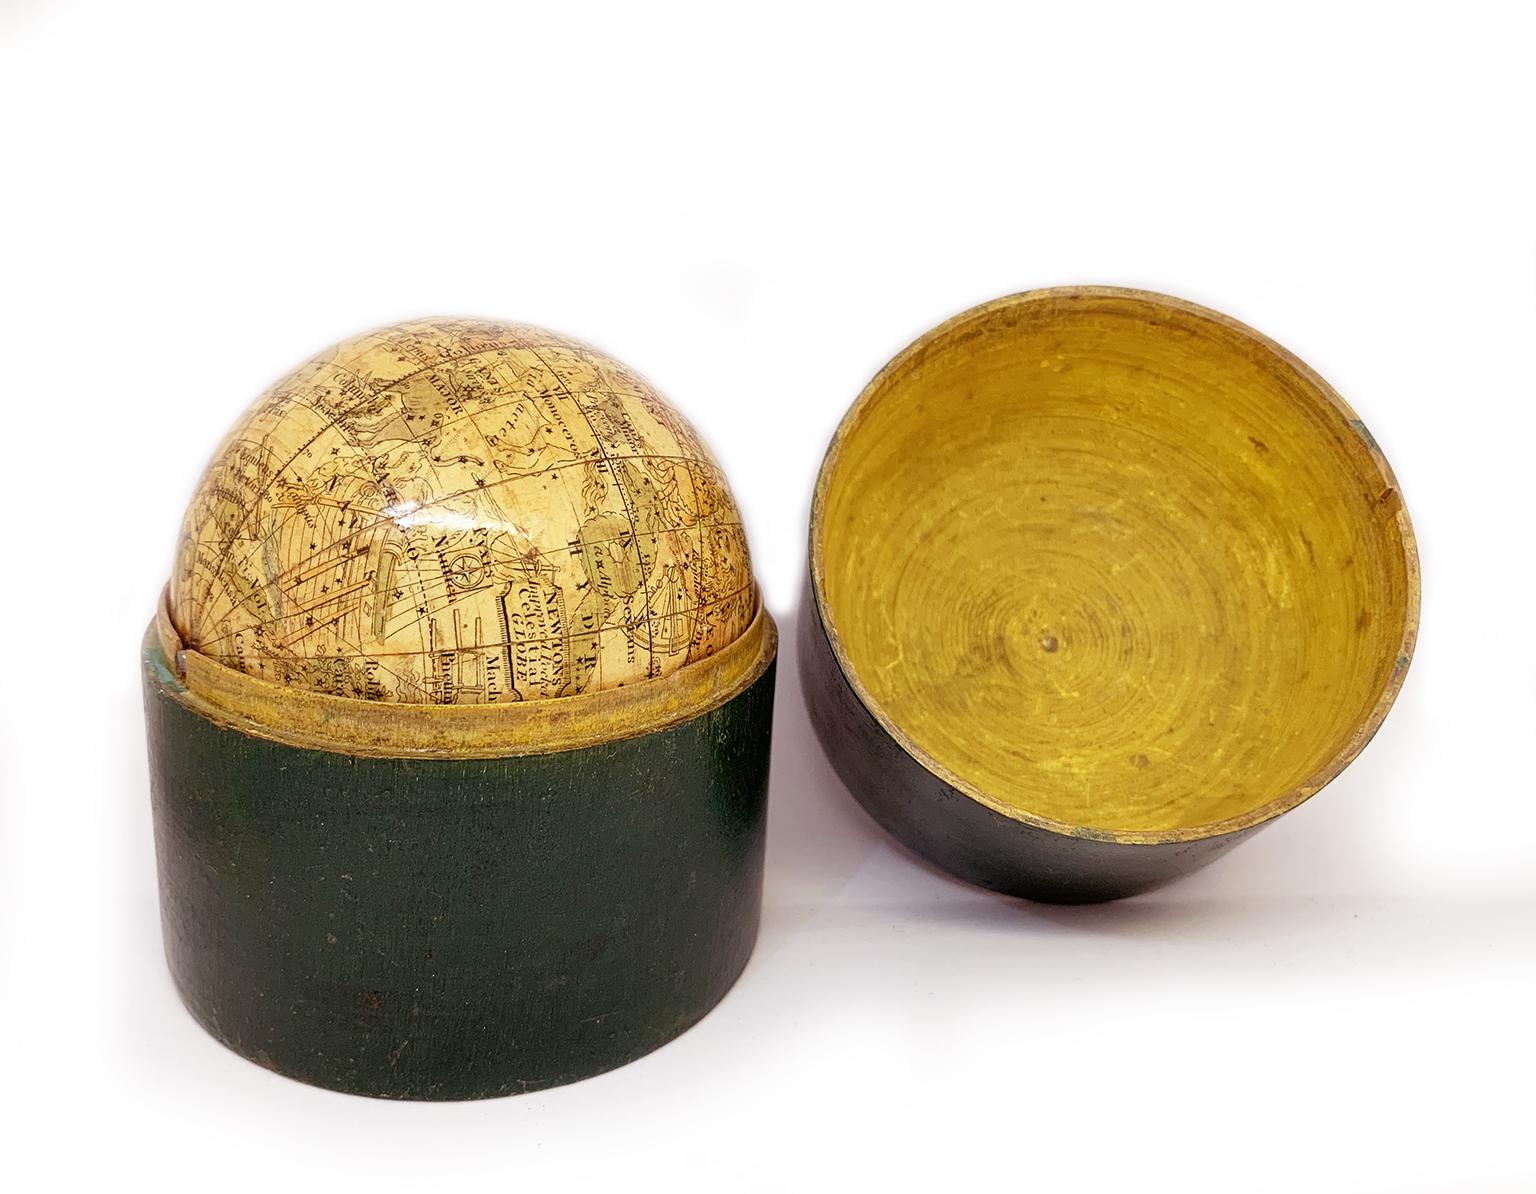 Pocket Globe
Newton
London, 1860 circa

The globe is contained in a cylindrical box of turned and stained wood.
It measures: the globe 3 in (7,6 cm) in diameter; the box 3.54 in (9 cm) in height x 3.26 in (8,3 cm) in diameter. 
It weights: